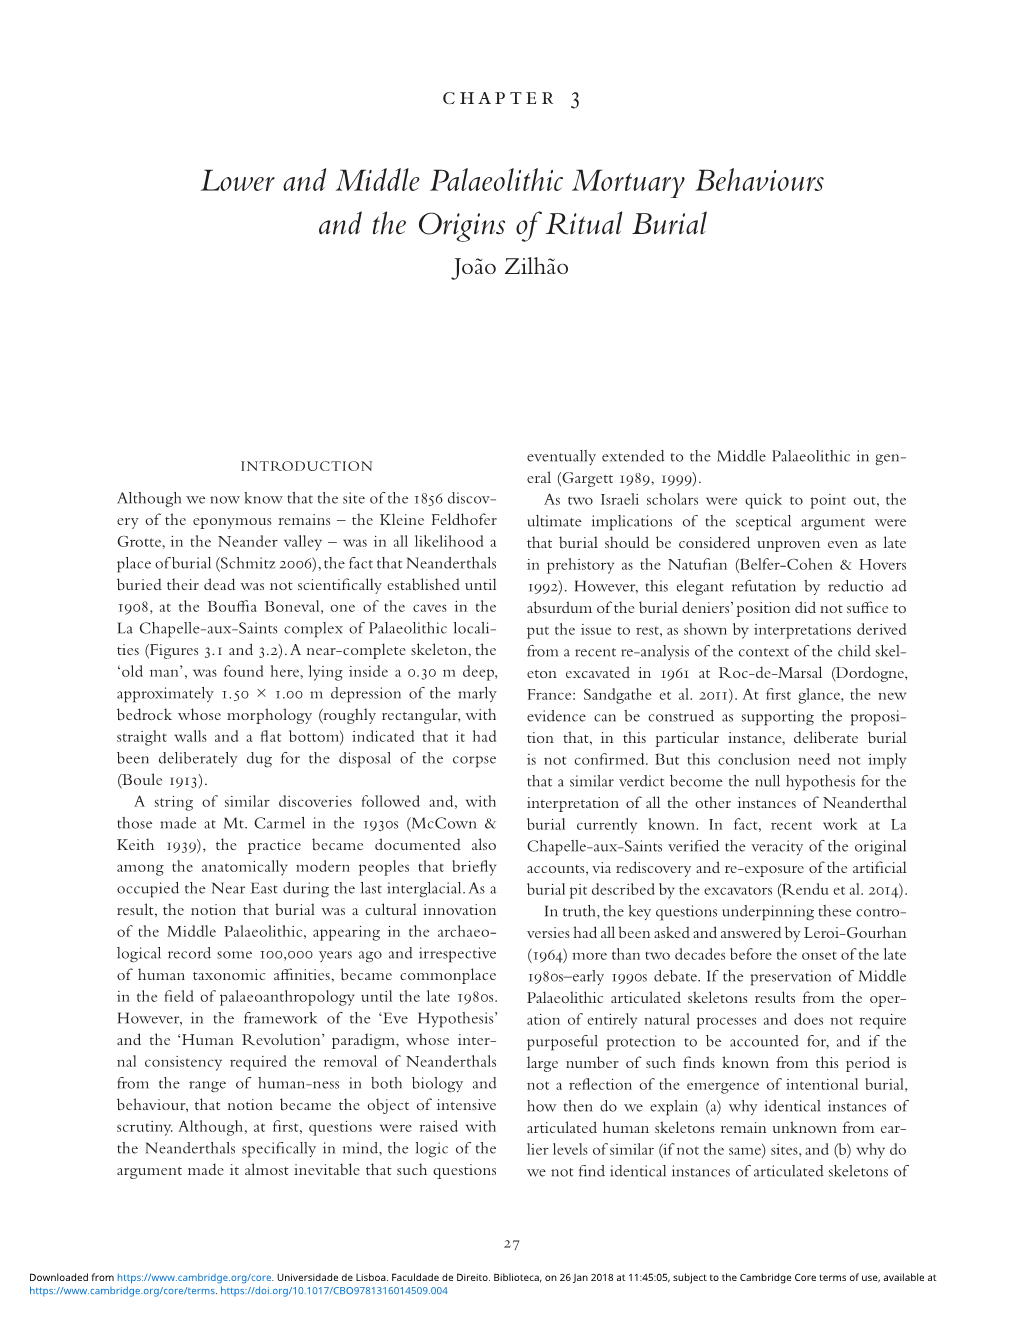 Lower and Middle Palaeolithic Mortuary Behaviours and The